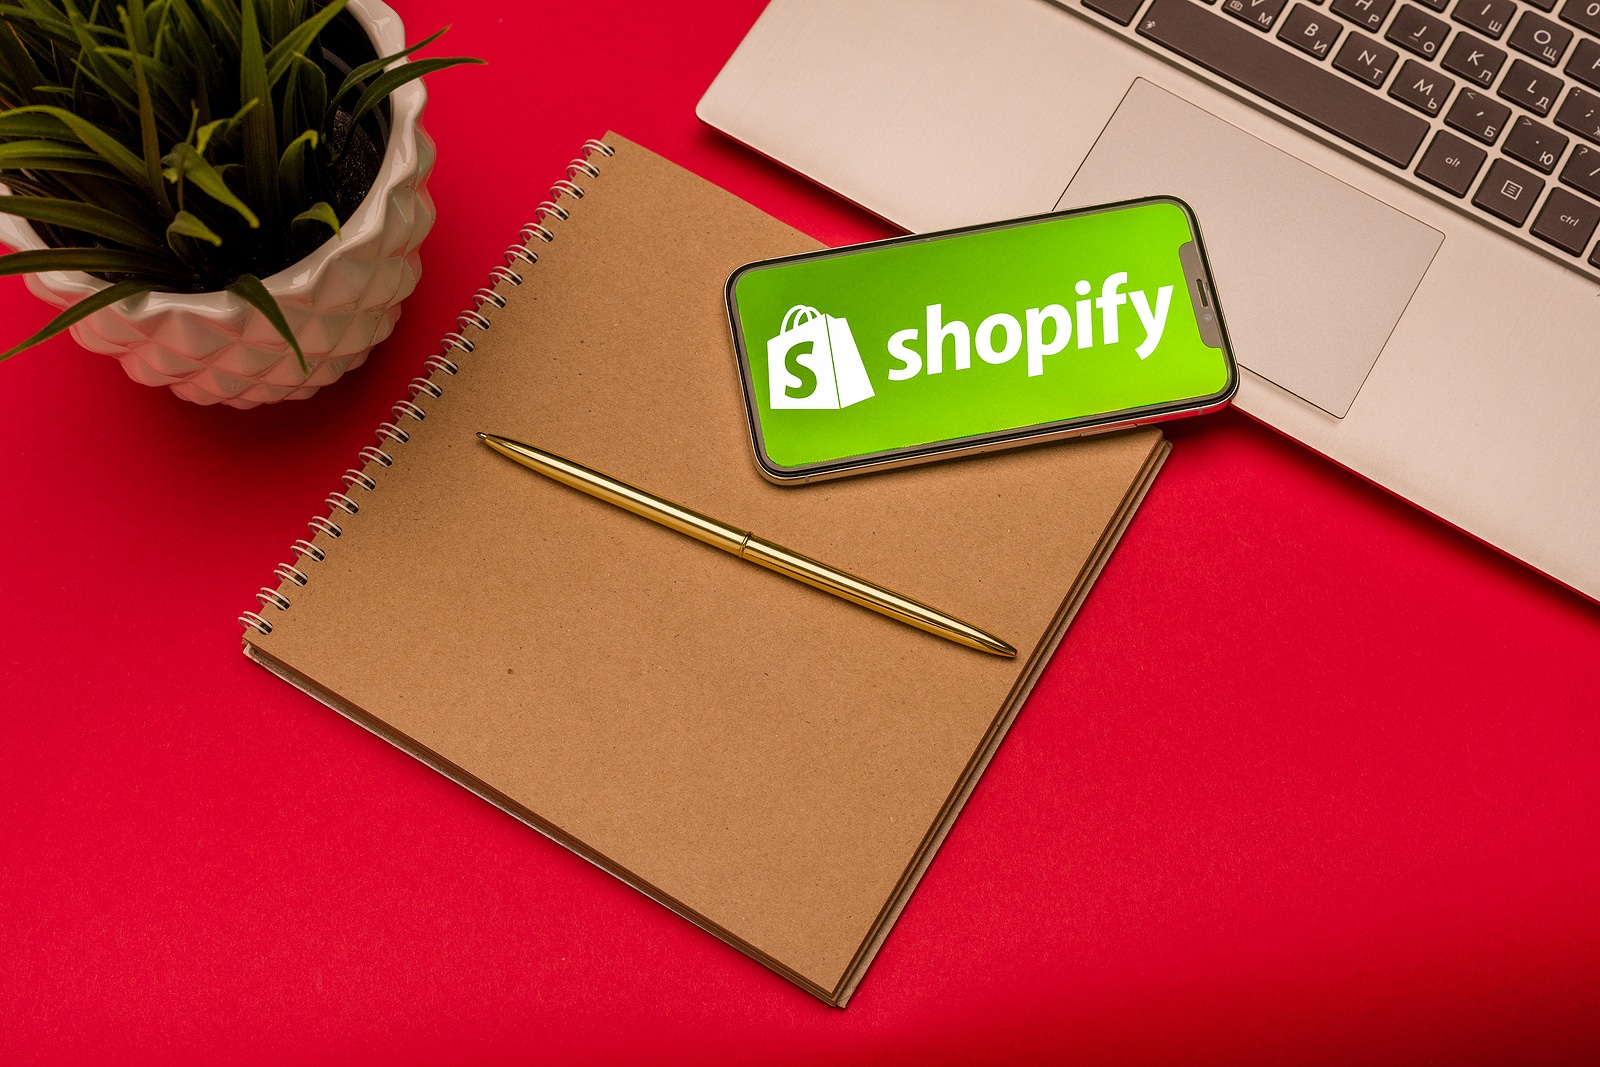 HOW TO MAKE $500 A DAY FROM YOUR SHOPIFY STORE